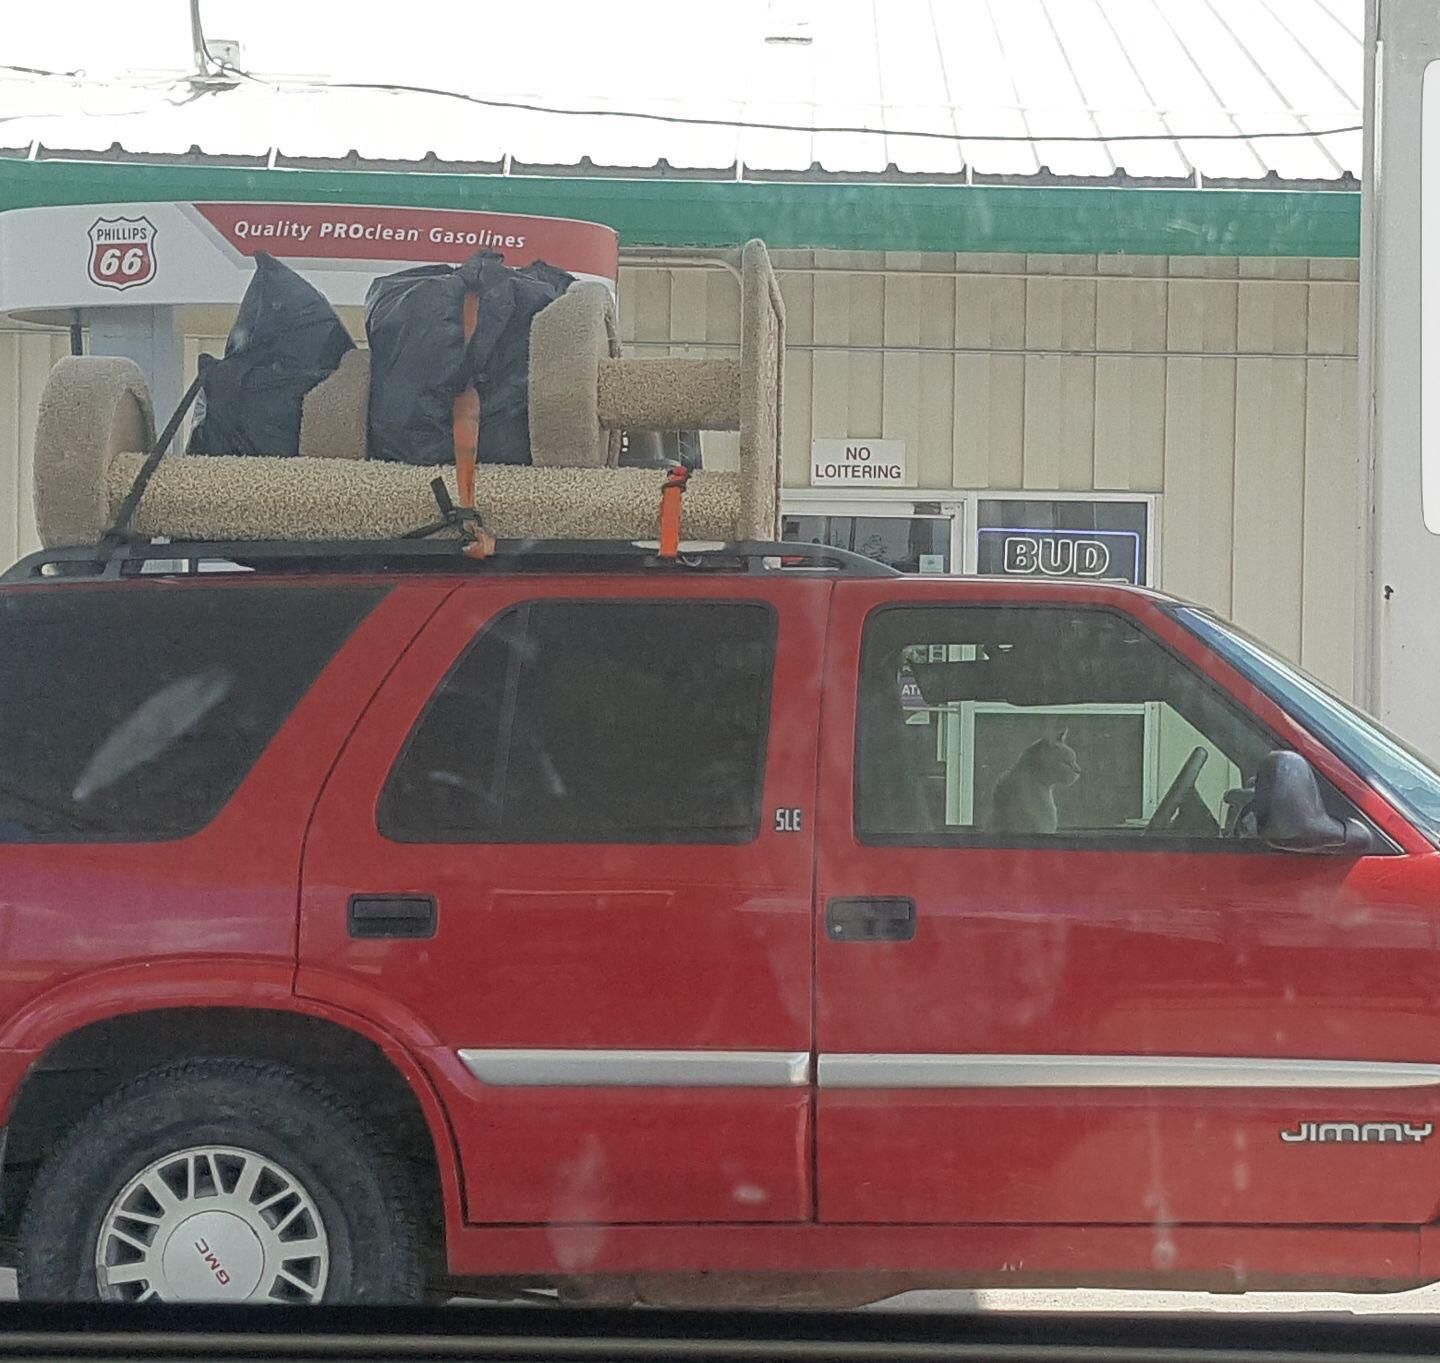 Saw this cat fueling up off of the Interstate. They've clearly got the essentials, and are not looking back.